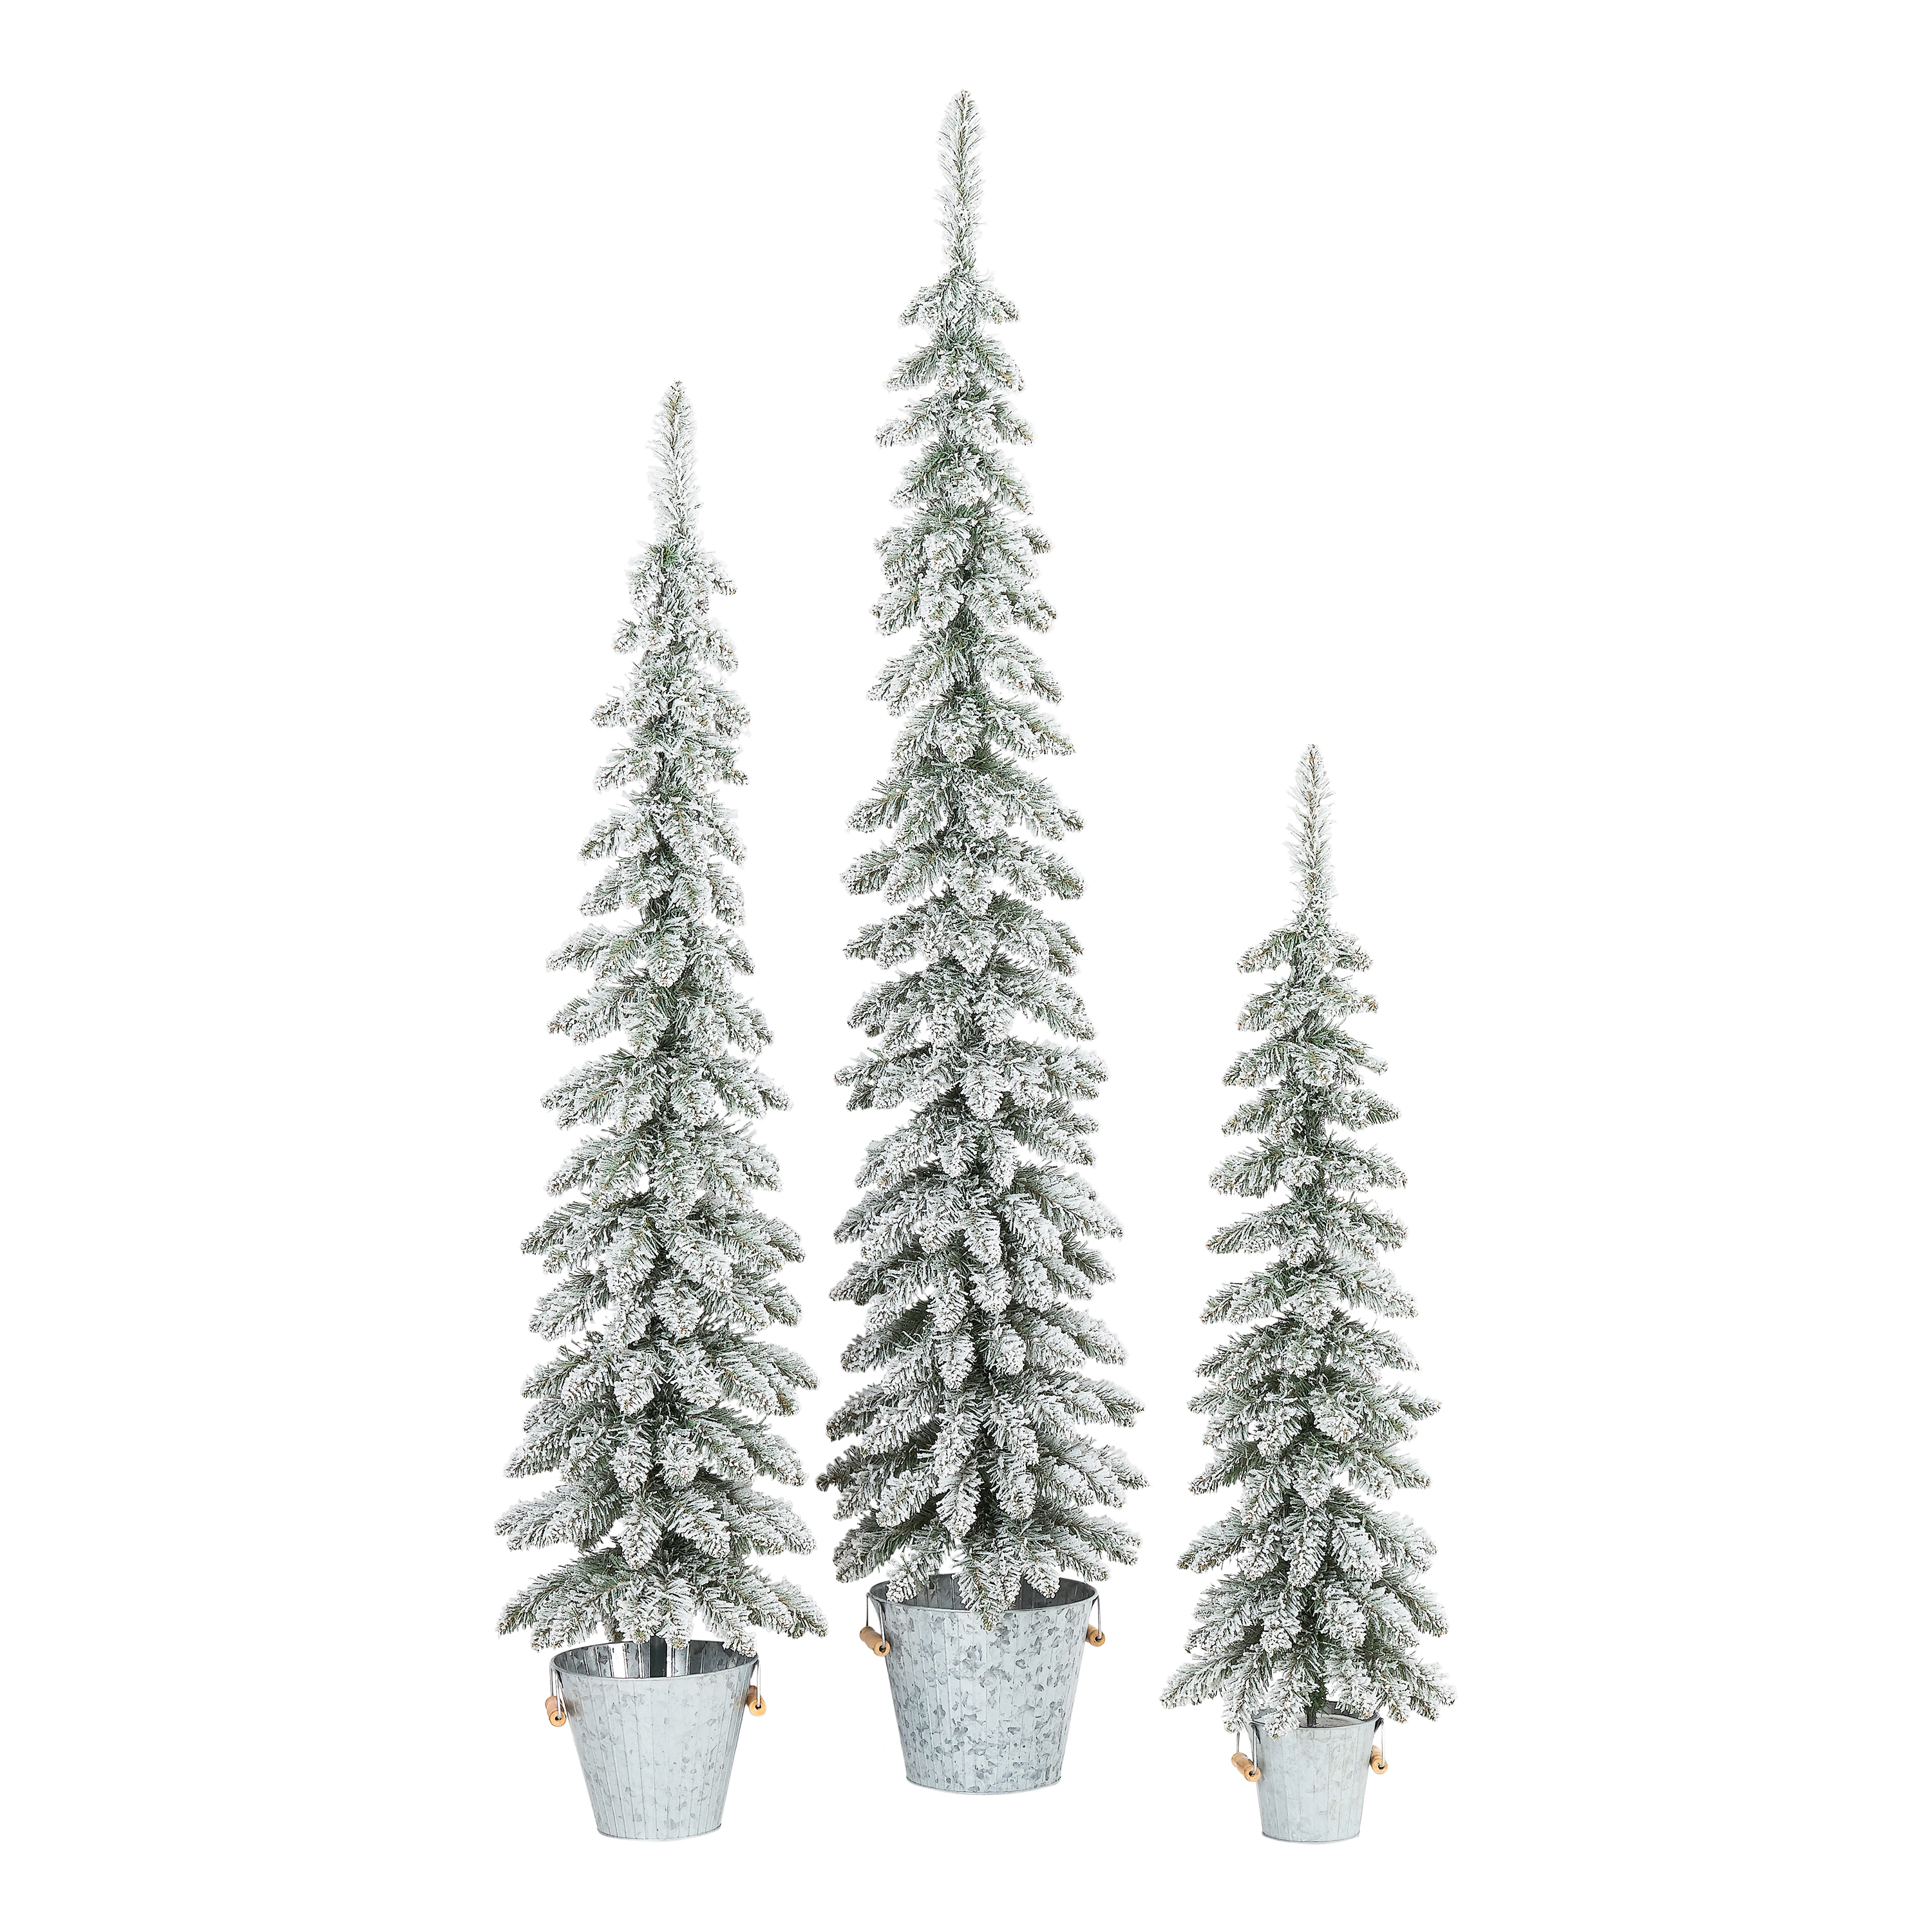 Holiday Time Flocked Pine Tree with Galvanized Pot, Set of 3, 3ft/4ft/5ft - image 1 of 2